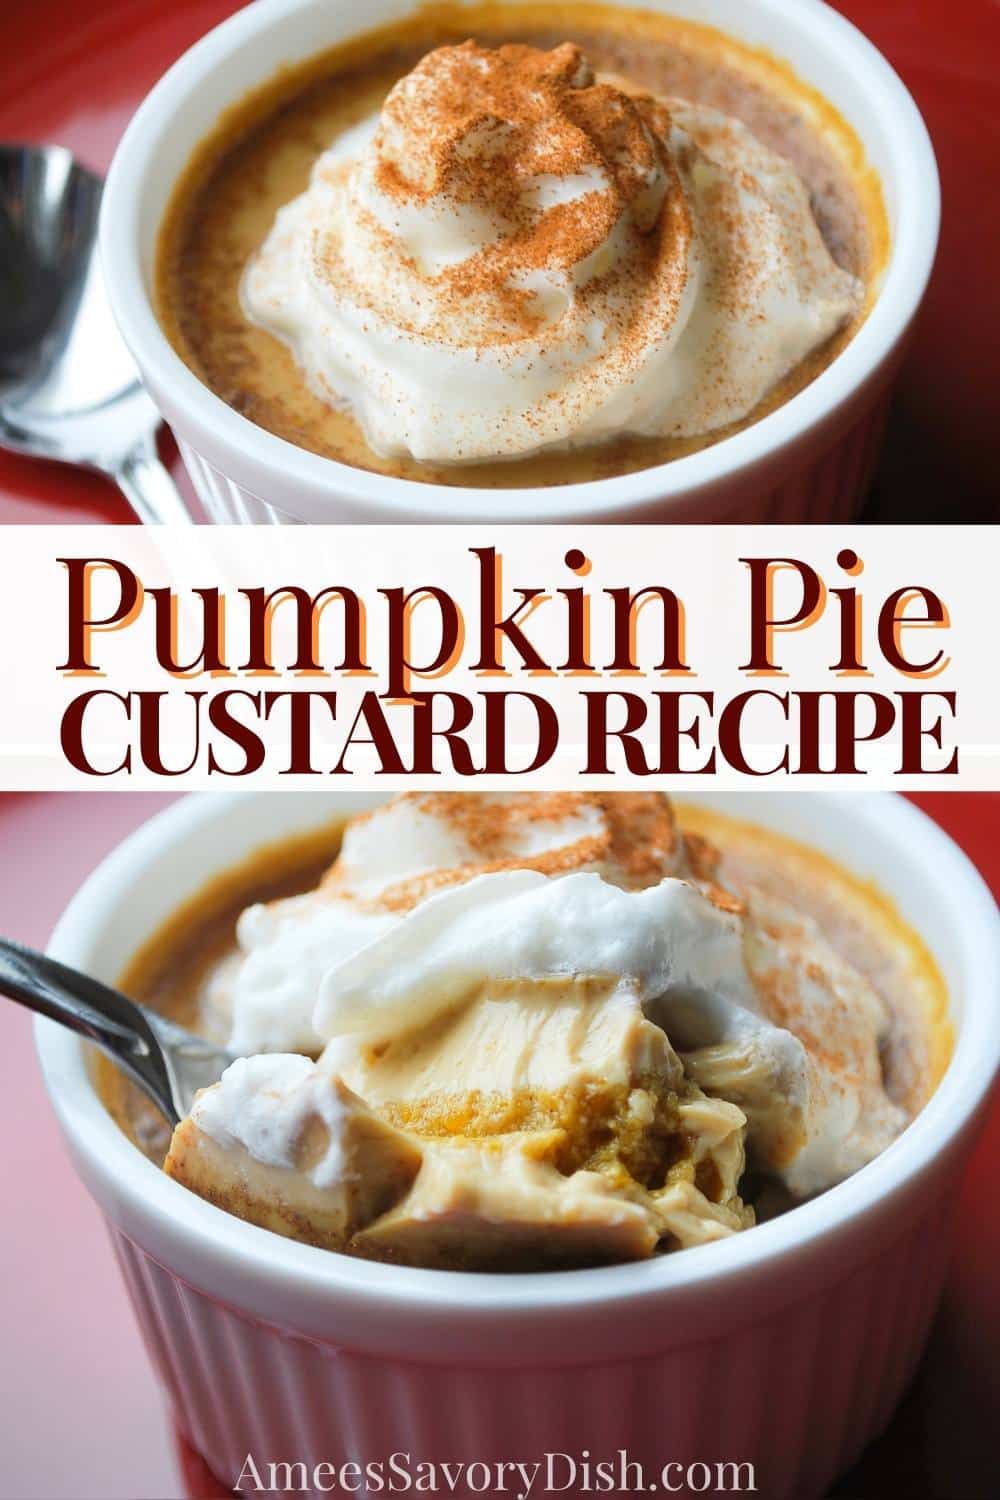 This delicious homemade Pumpkin Pie Custard is essentially fresh pumpkin pie without the fuss of the crust. A great gluten-free and refined sugar-free alternative to classic pumpkin pie! via @Ameessavorydish